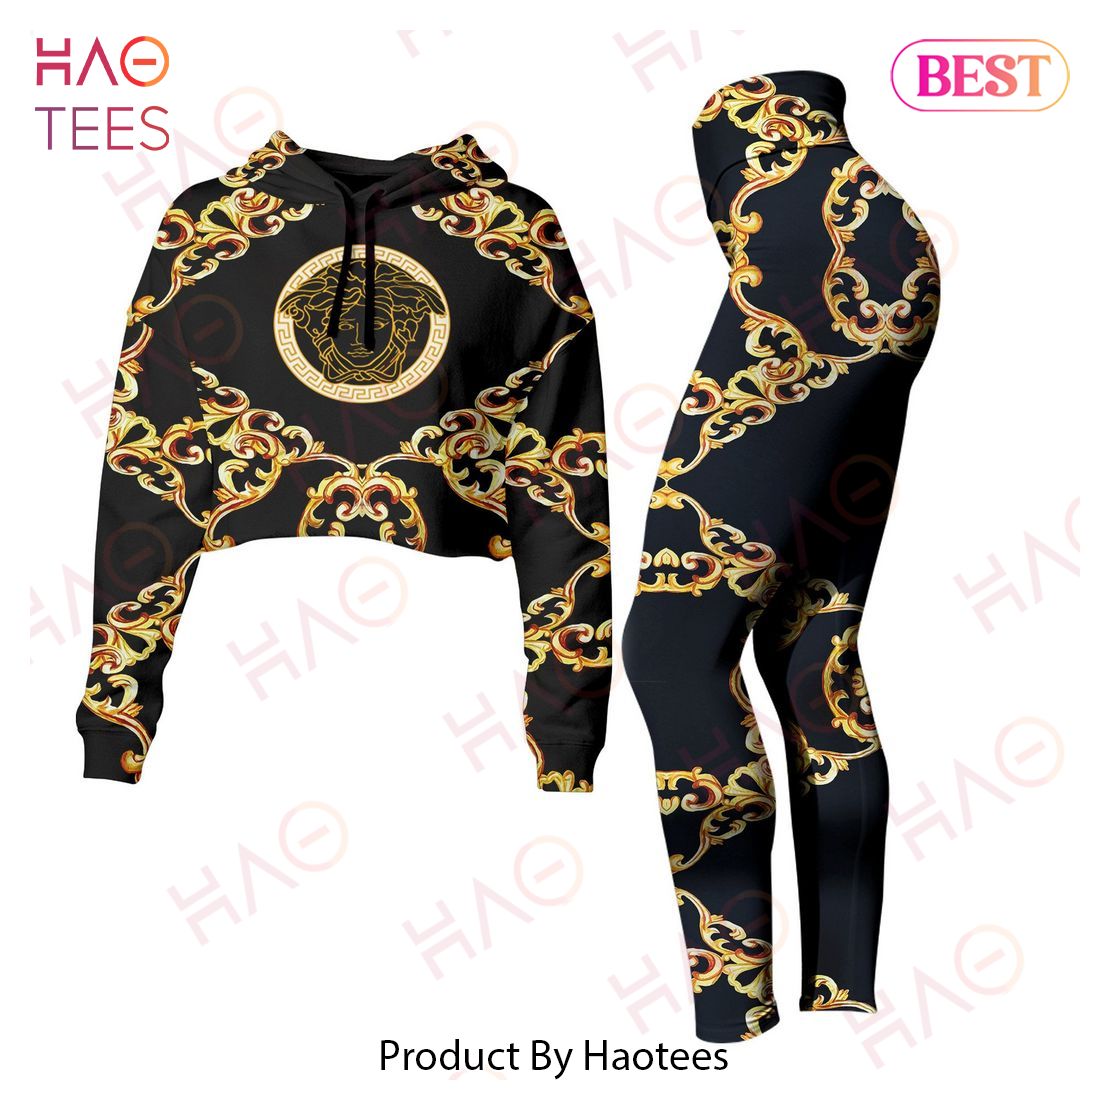 Versace Black Mix Gold Crop Hoodie vs Legging Limited Edition